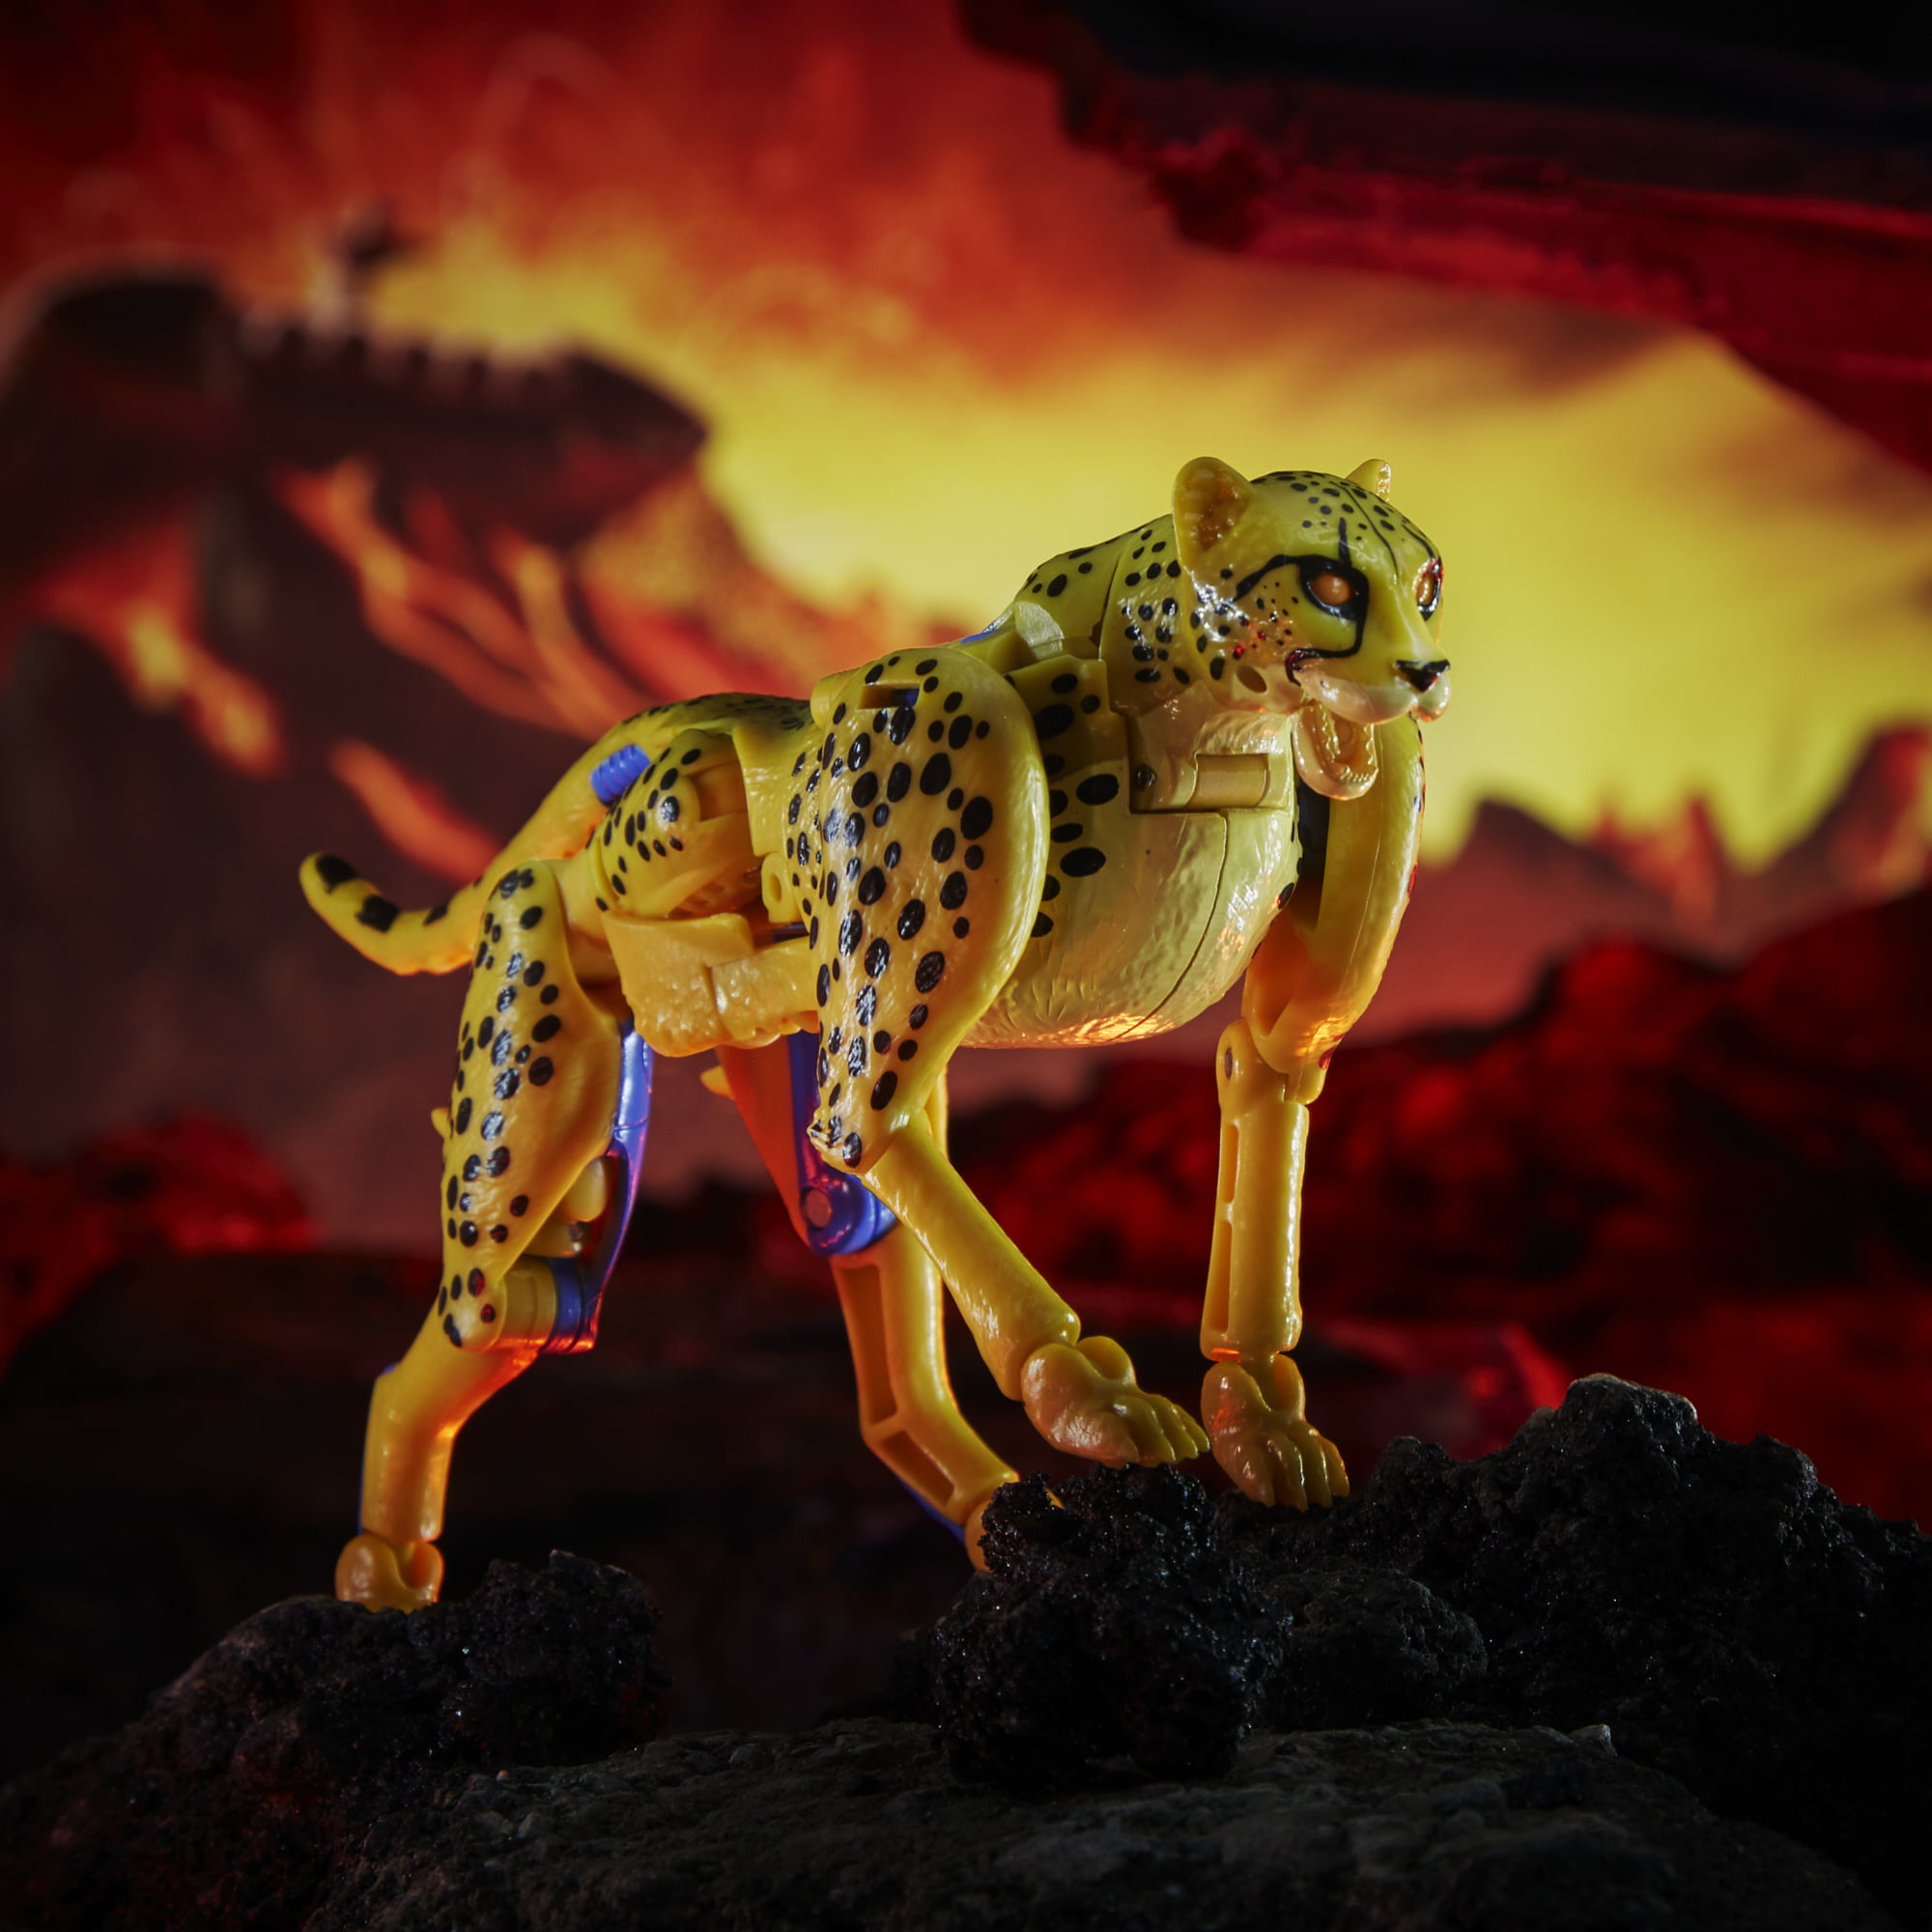 Transformers War For Cybertron Kingdom Deluxe Class Cheetor 